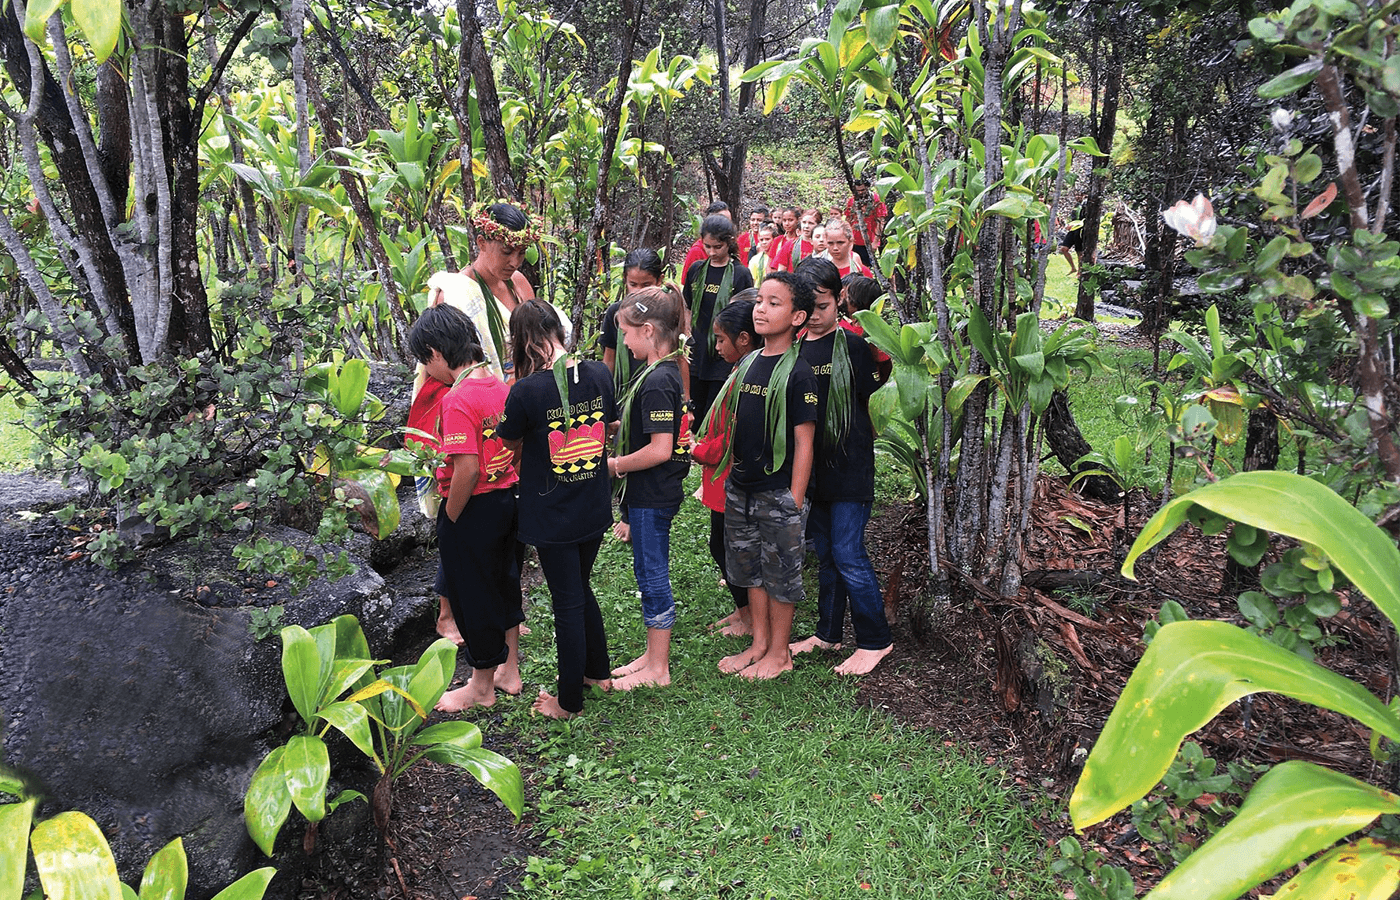 Students from the Kua O Ka Lā New Century Public Charter School in Hilo, Hawaii, led by their kumu (teacher), learn about the cultural and medicinal uses of native plants while exploring a local forest.